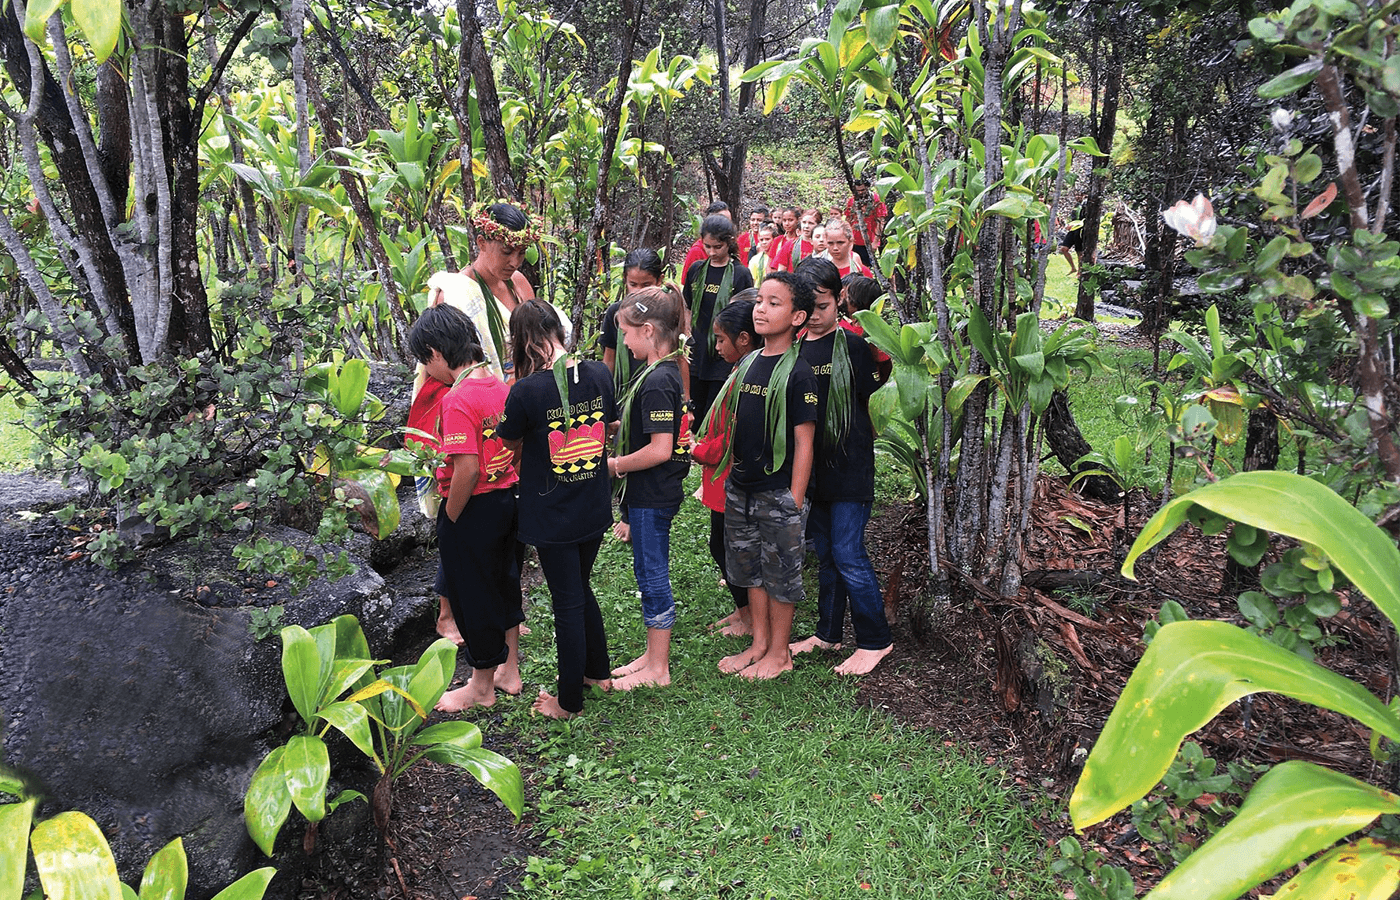 Students from the Kua O Ka Lā New Century Public Charter School in Hilo, Hawaii, led by their kumu (teacher), learn about the cultural and medicinal uses of native plants while exploring a local forest.